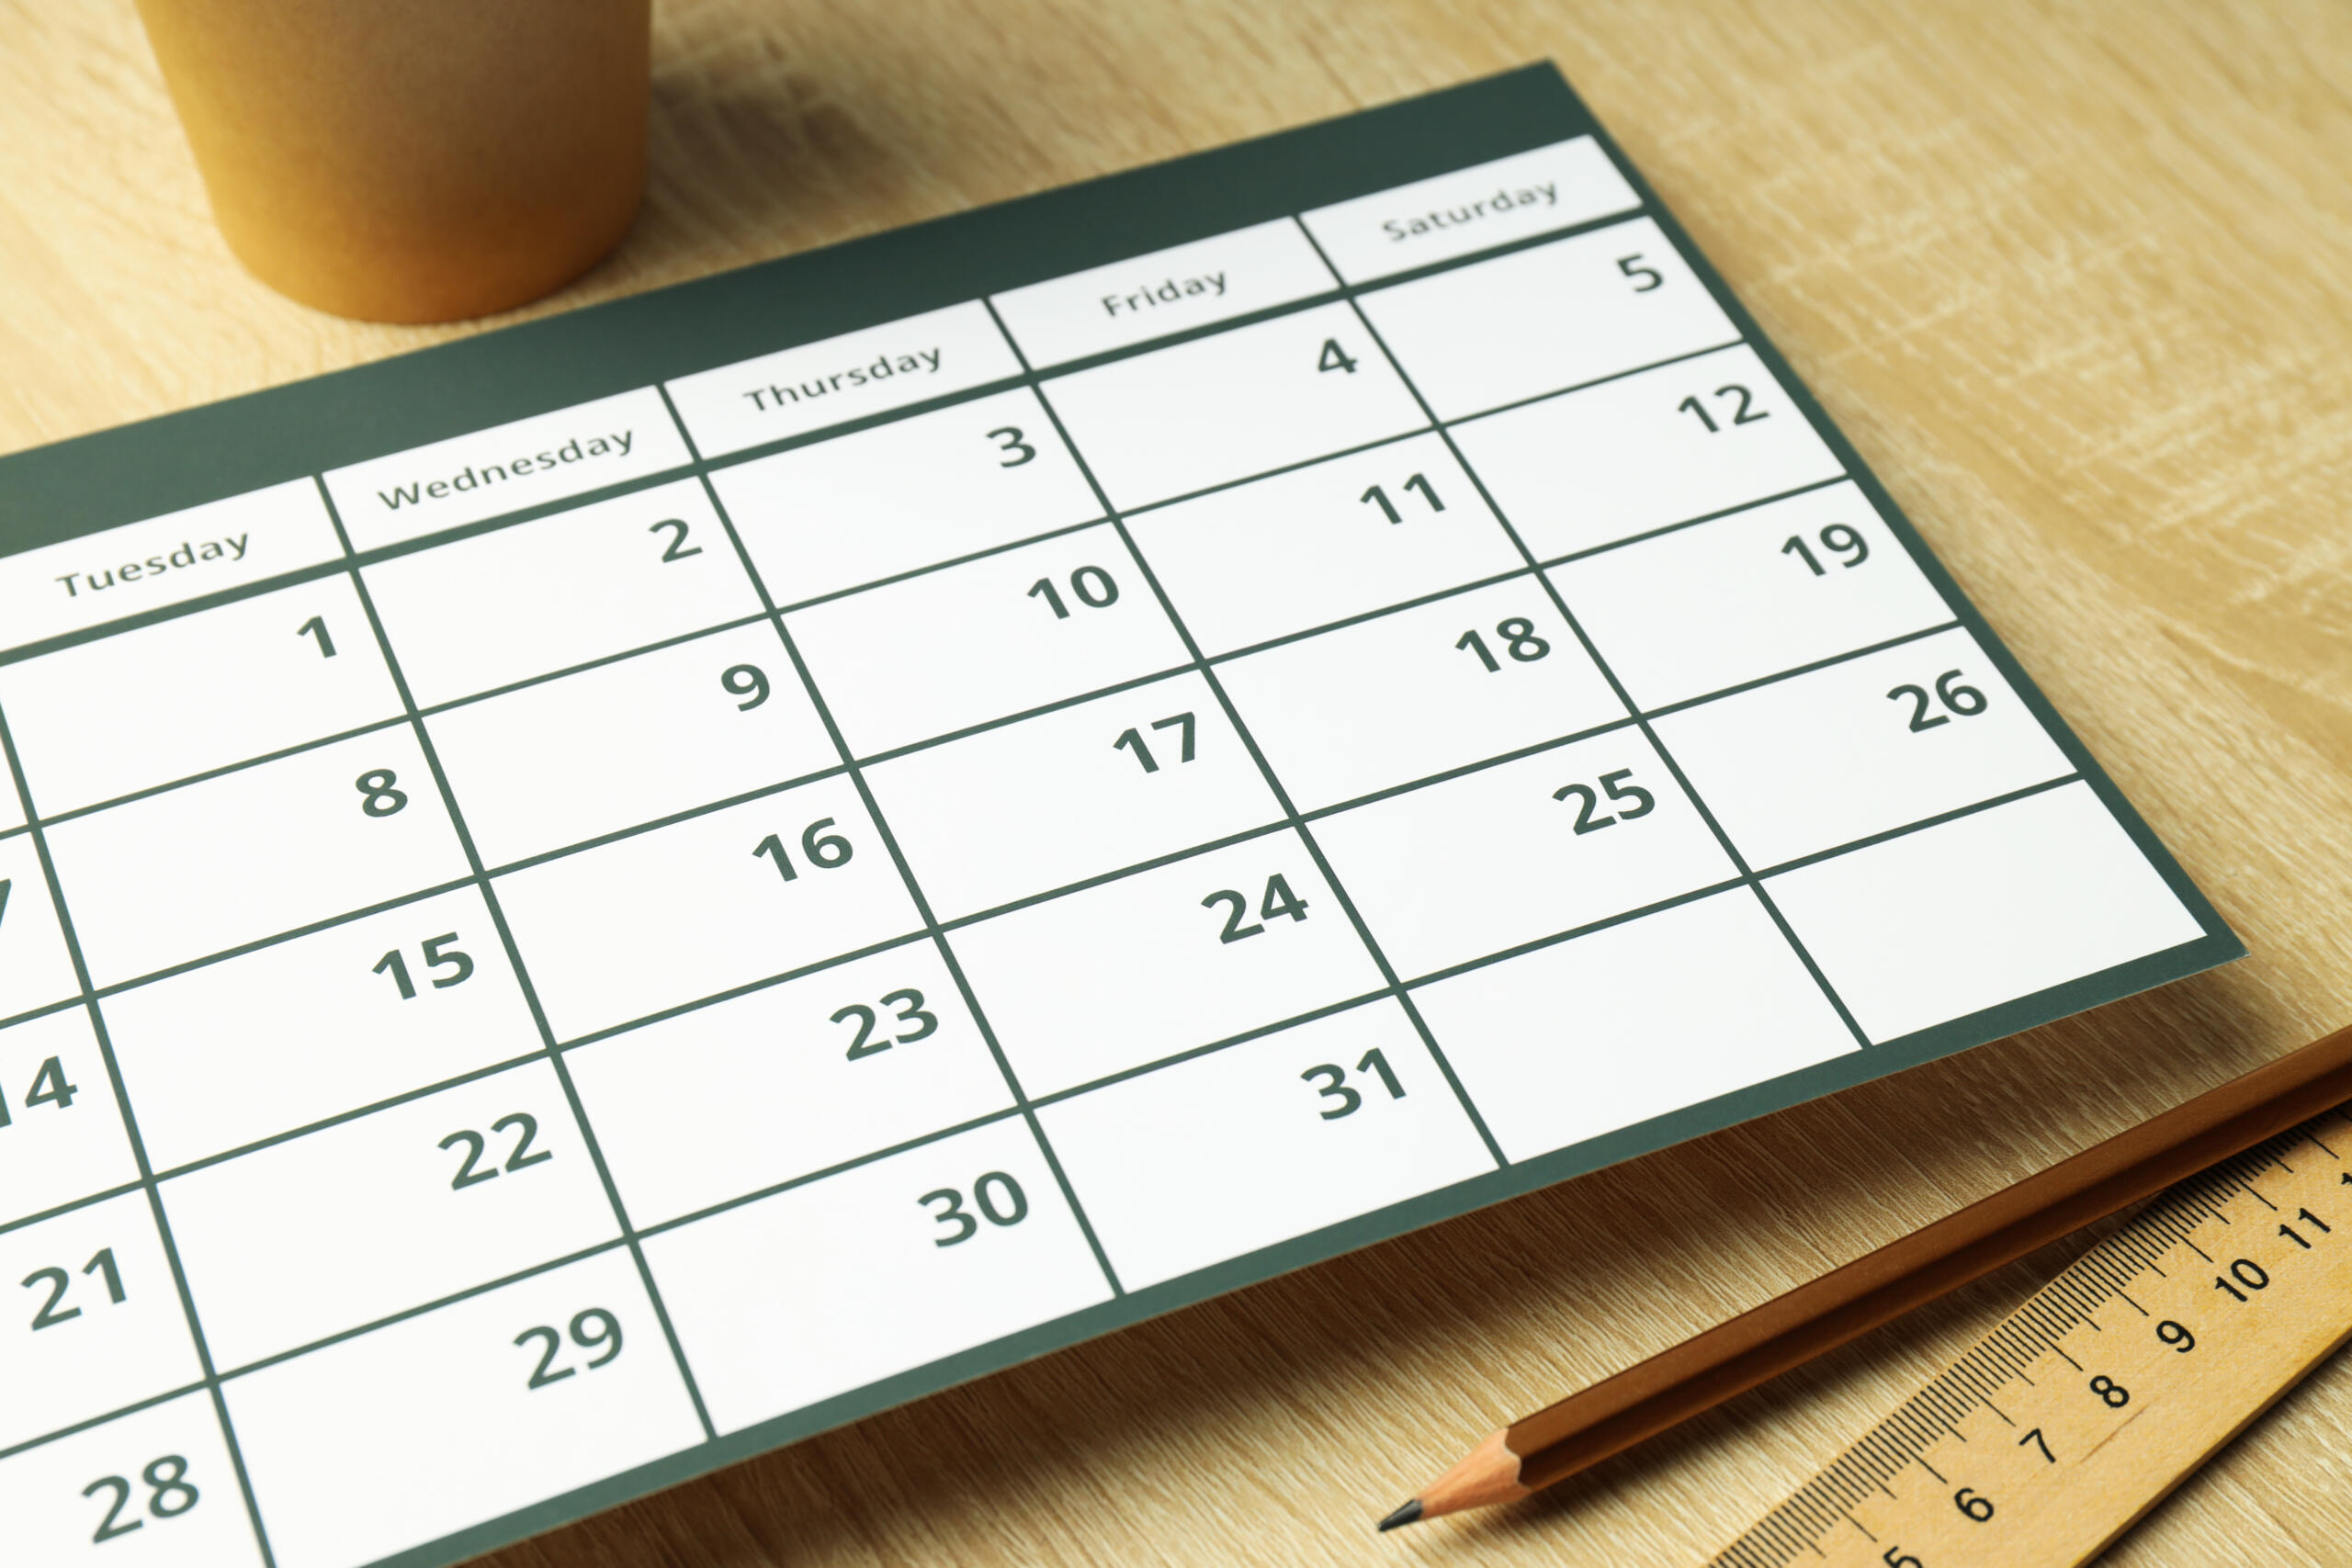 Effortless scheduling for your business: close-up of calendar on wooden surface with pencil, ruler, and coffee cup partially in frame